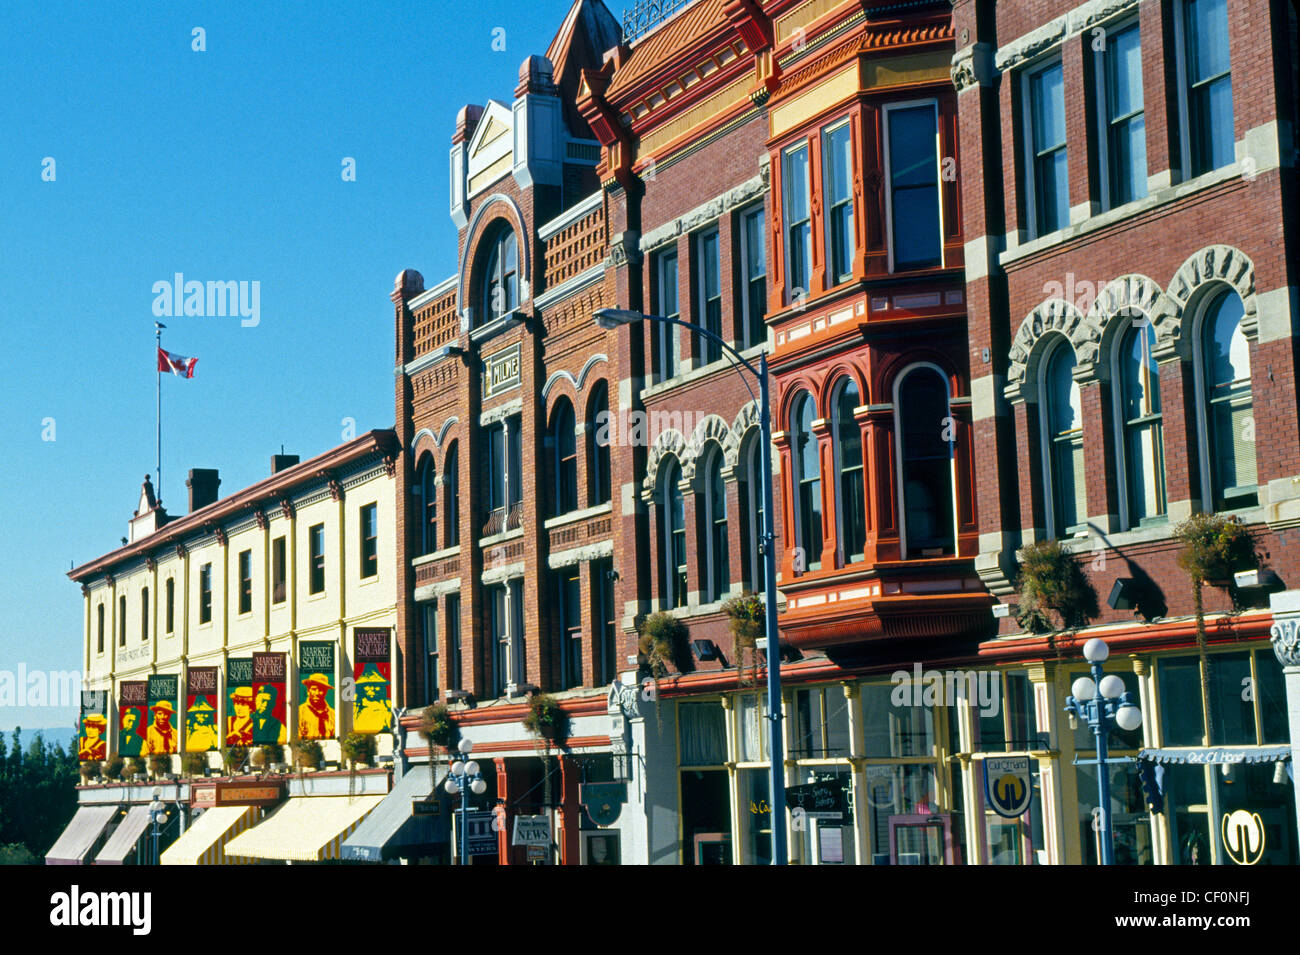 Market Square has popular shopping and dining spots in historical 19th-century brick-and-beam buildings in downtown Victoria, British Columbia, Canada. Stock Photo